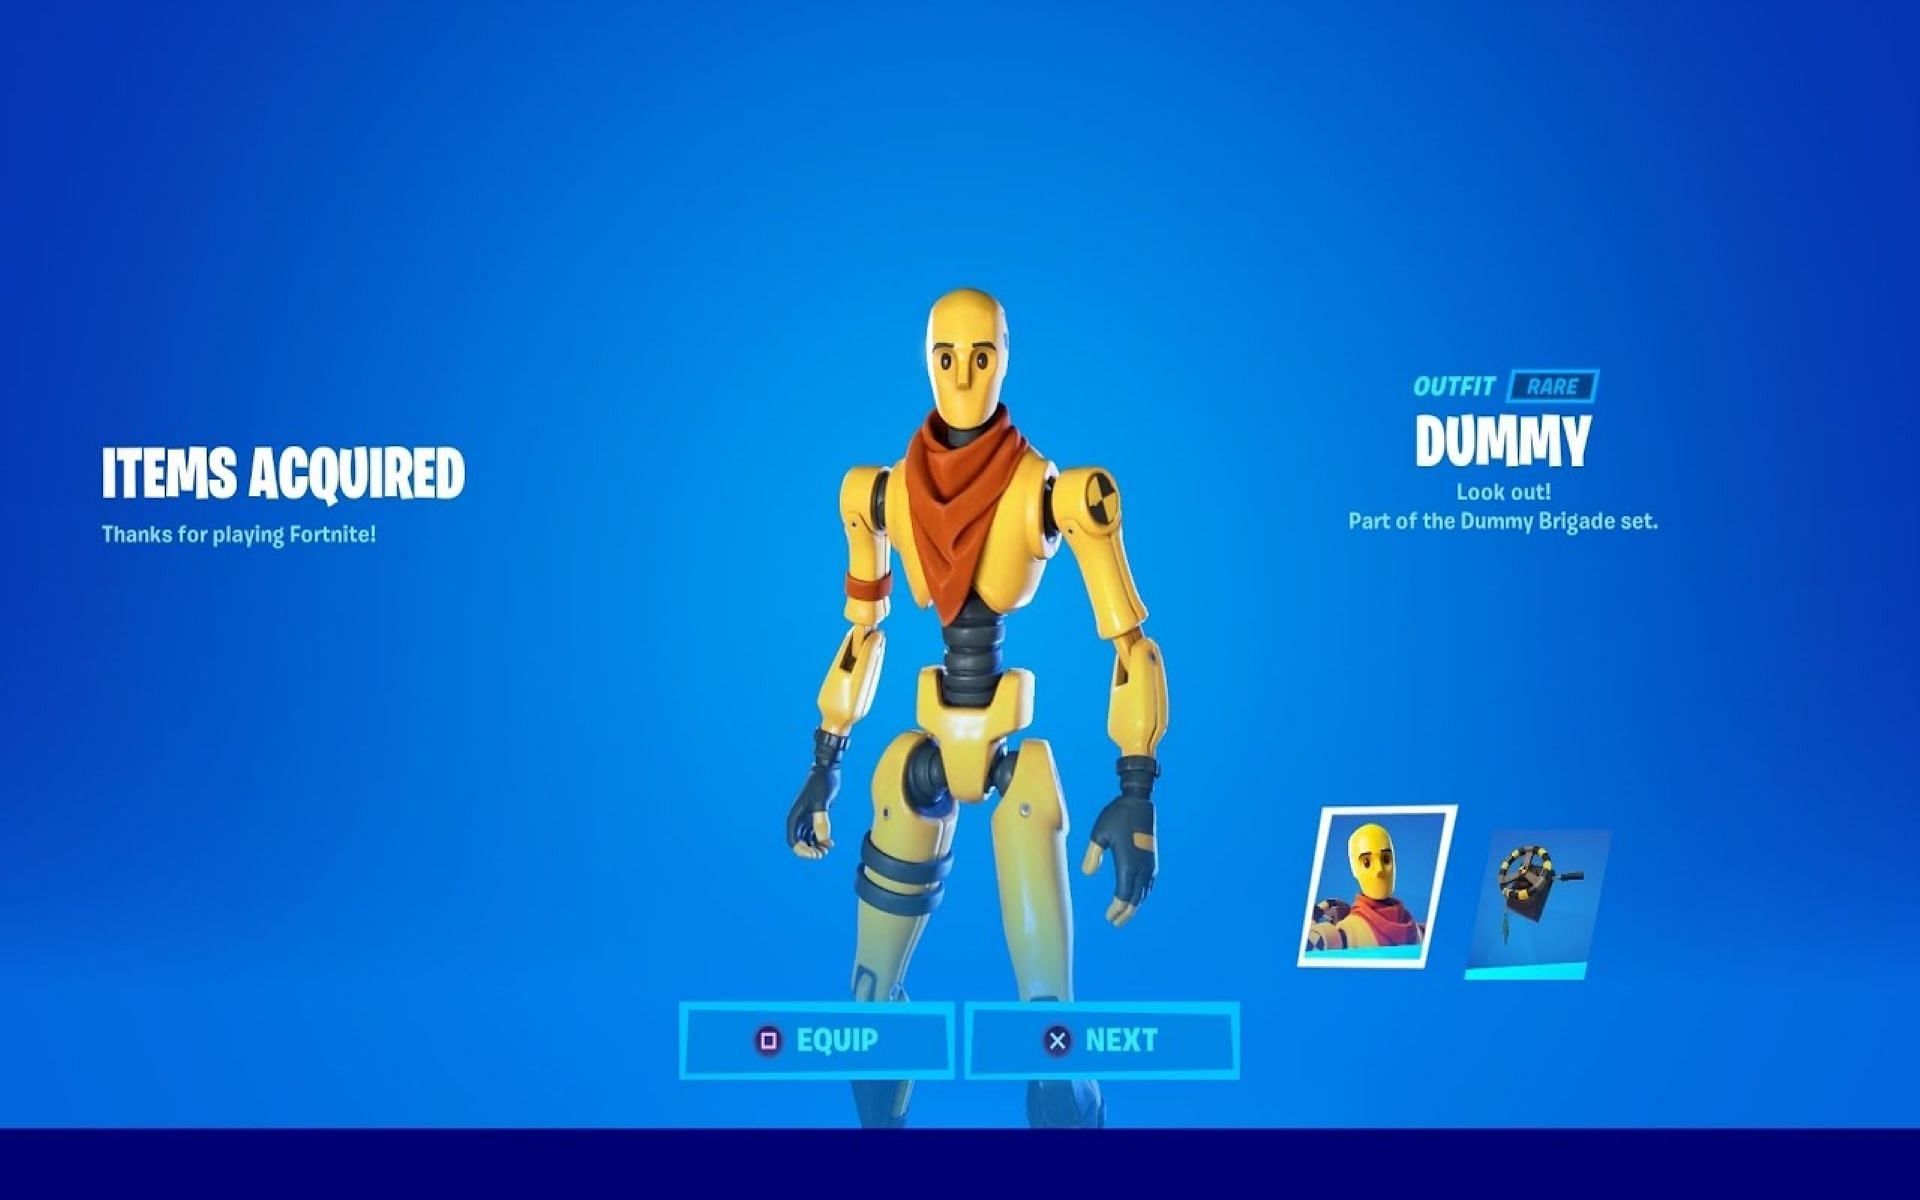 The Dummy skin in Fortnite is one of the most intimidating sweaty outfits (Image via Brani/YouTube)